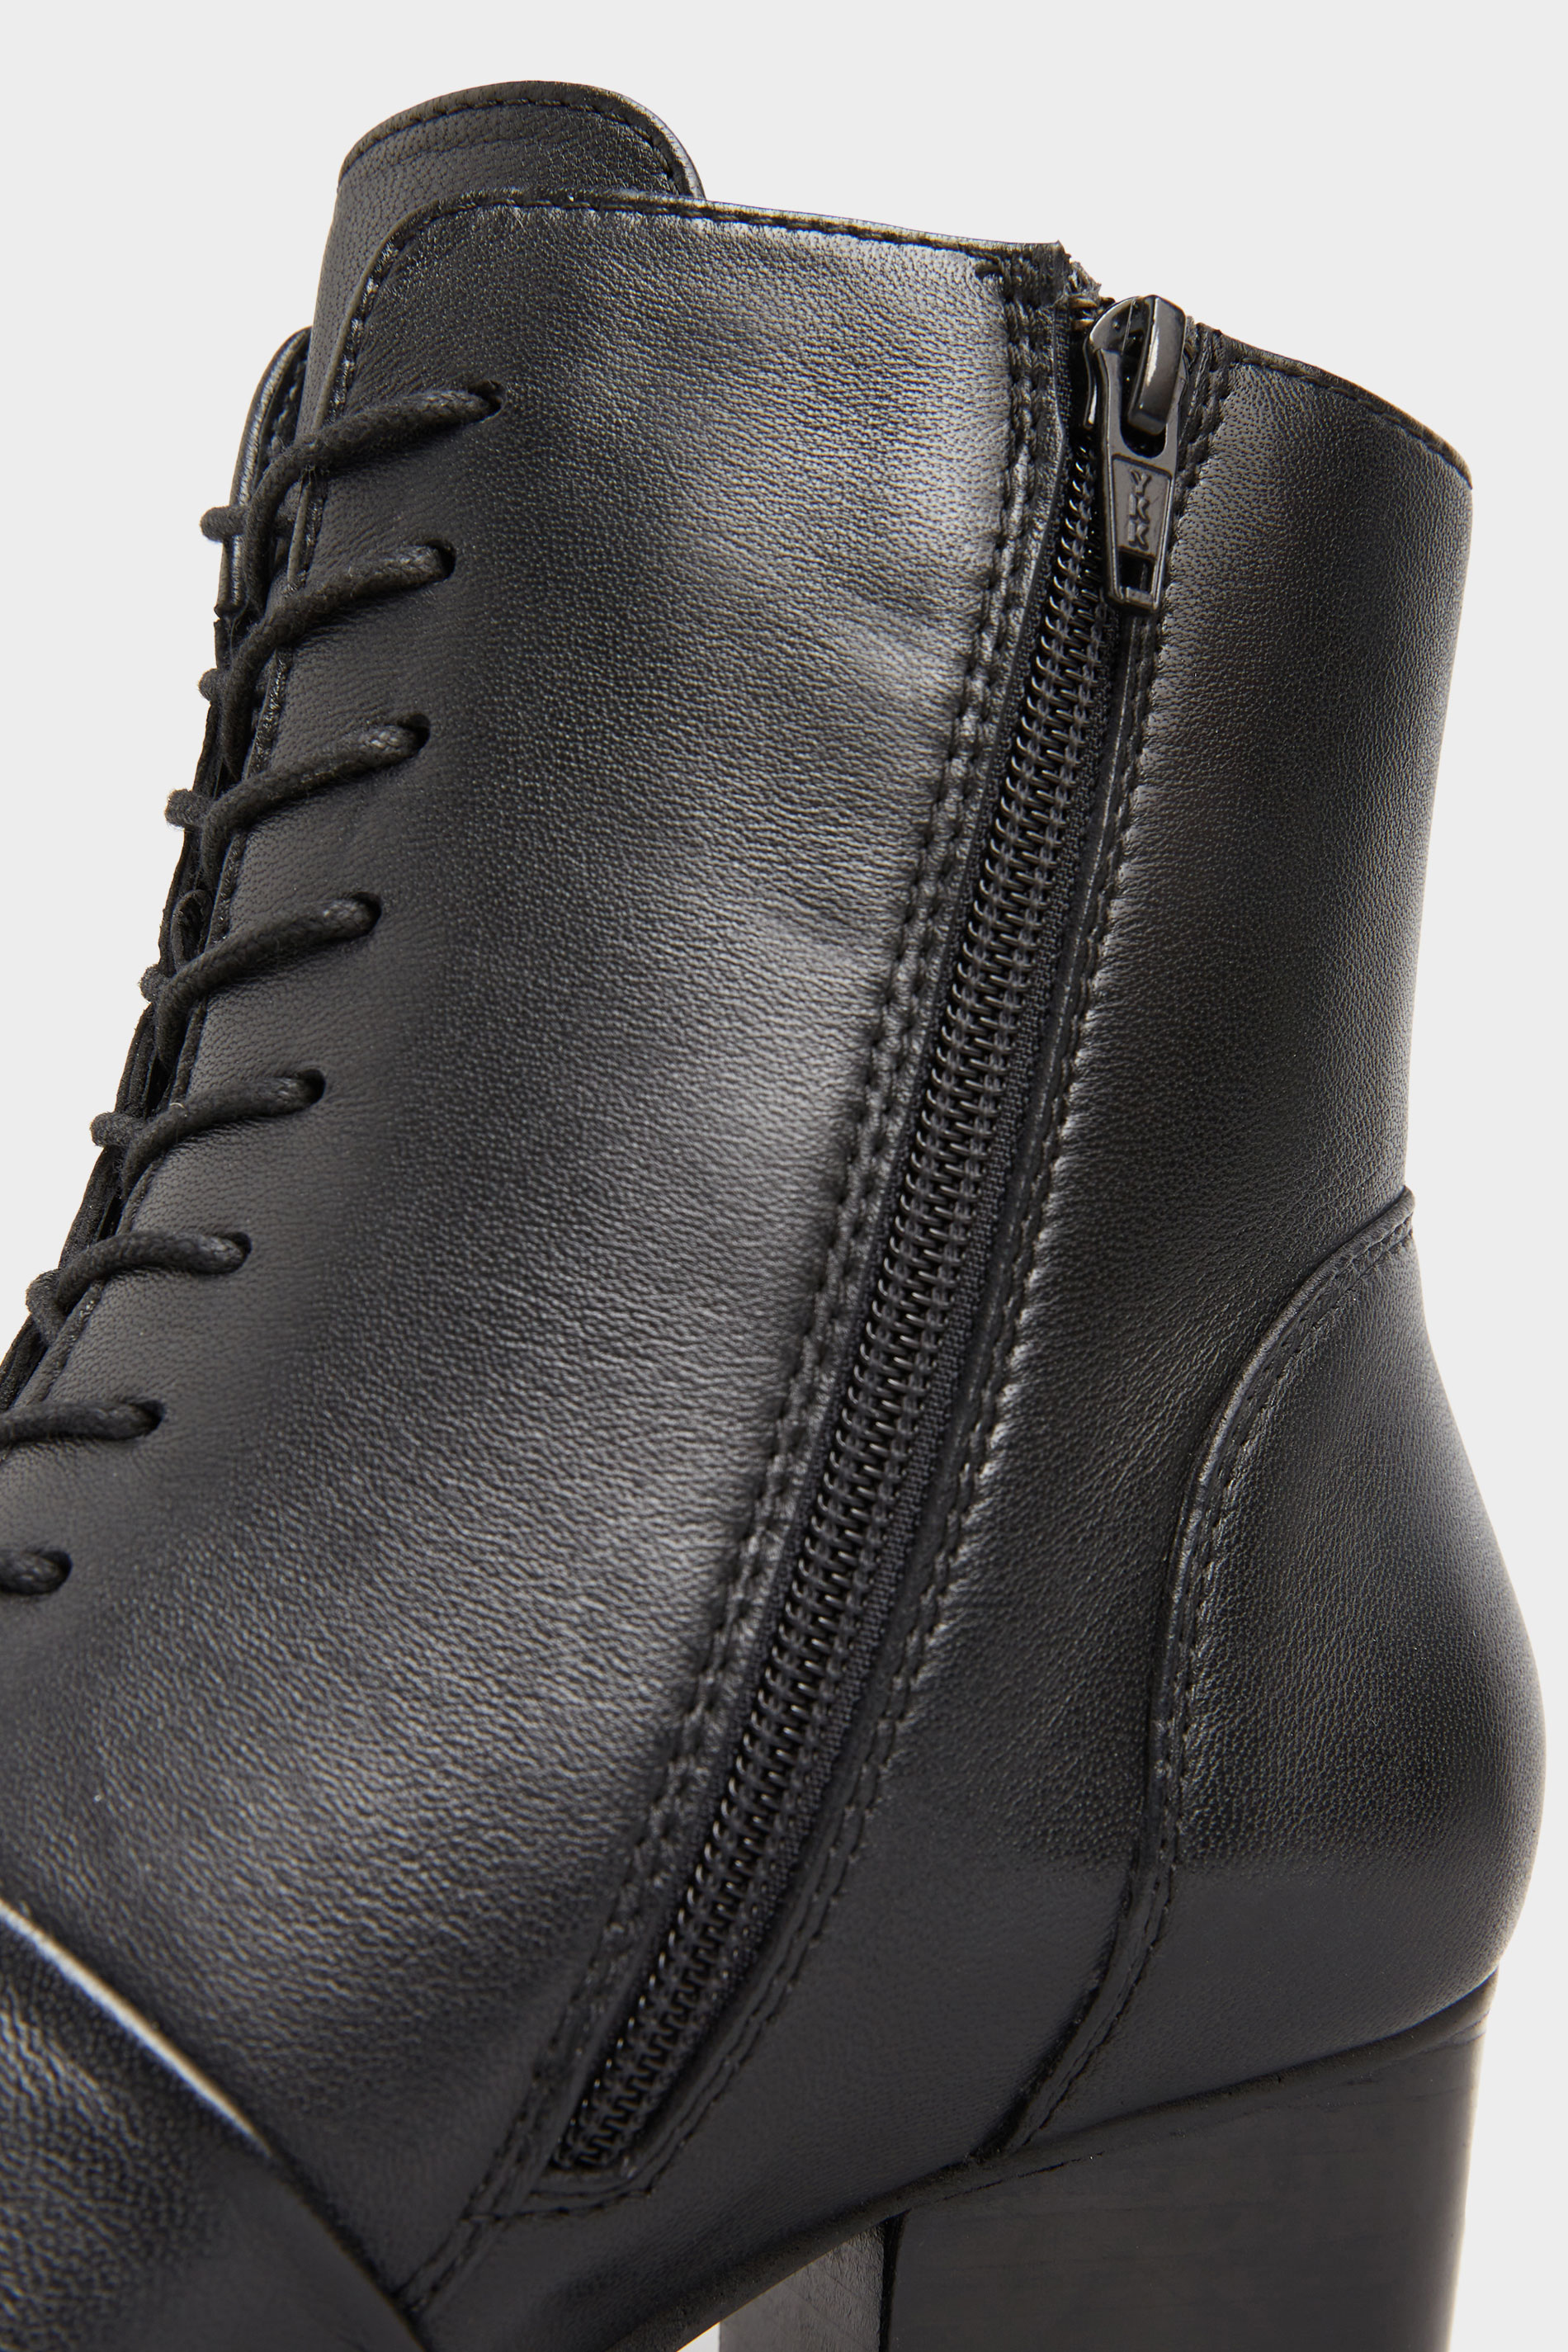 Black Leather Lace Up Heeled Boots In Extra Wide Fit Long Tall Sally